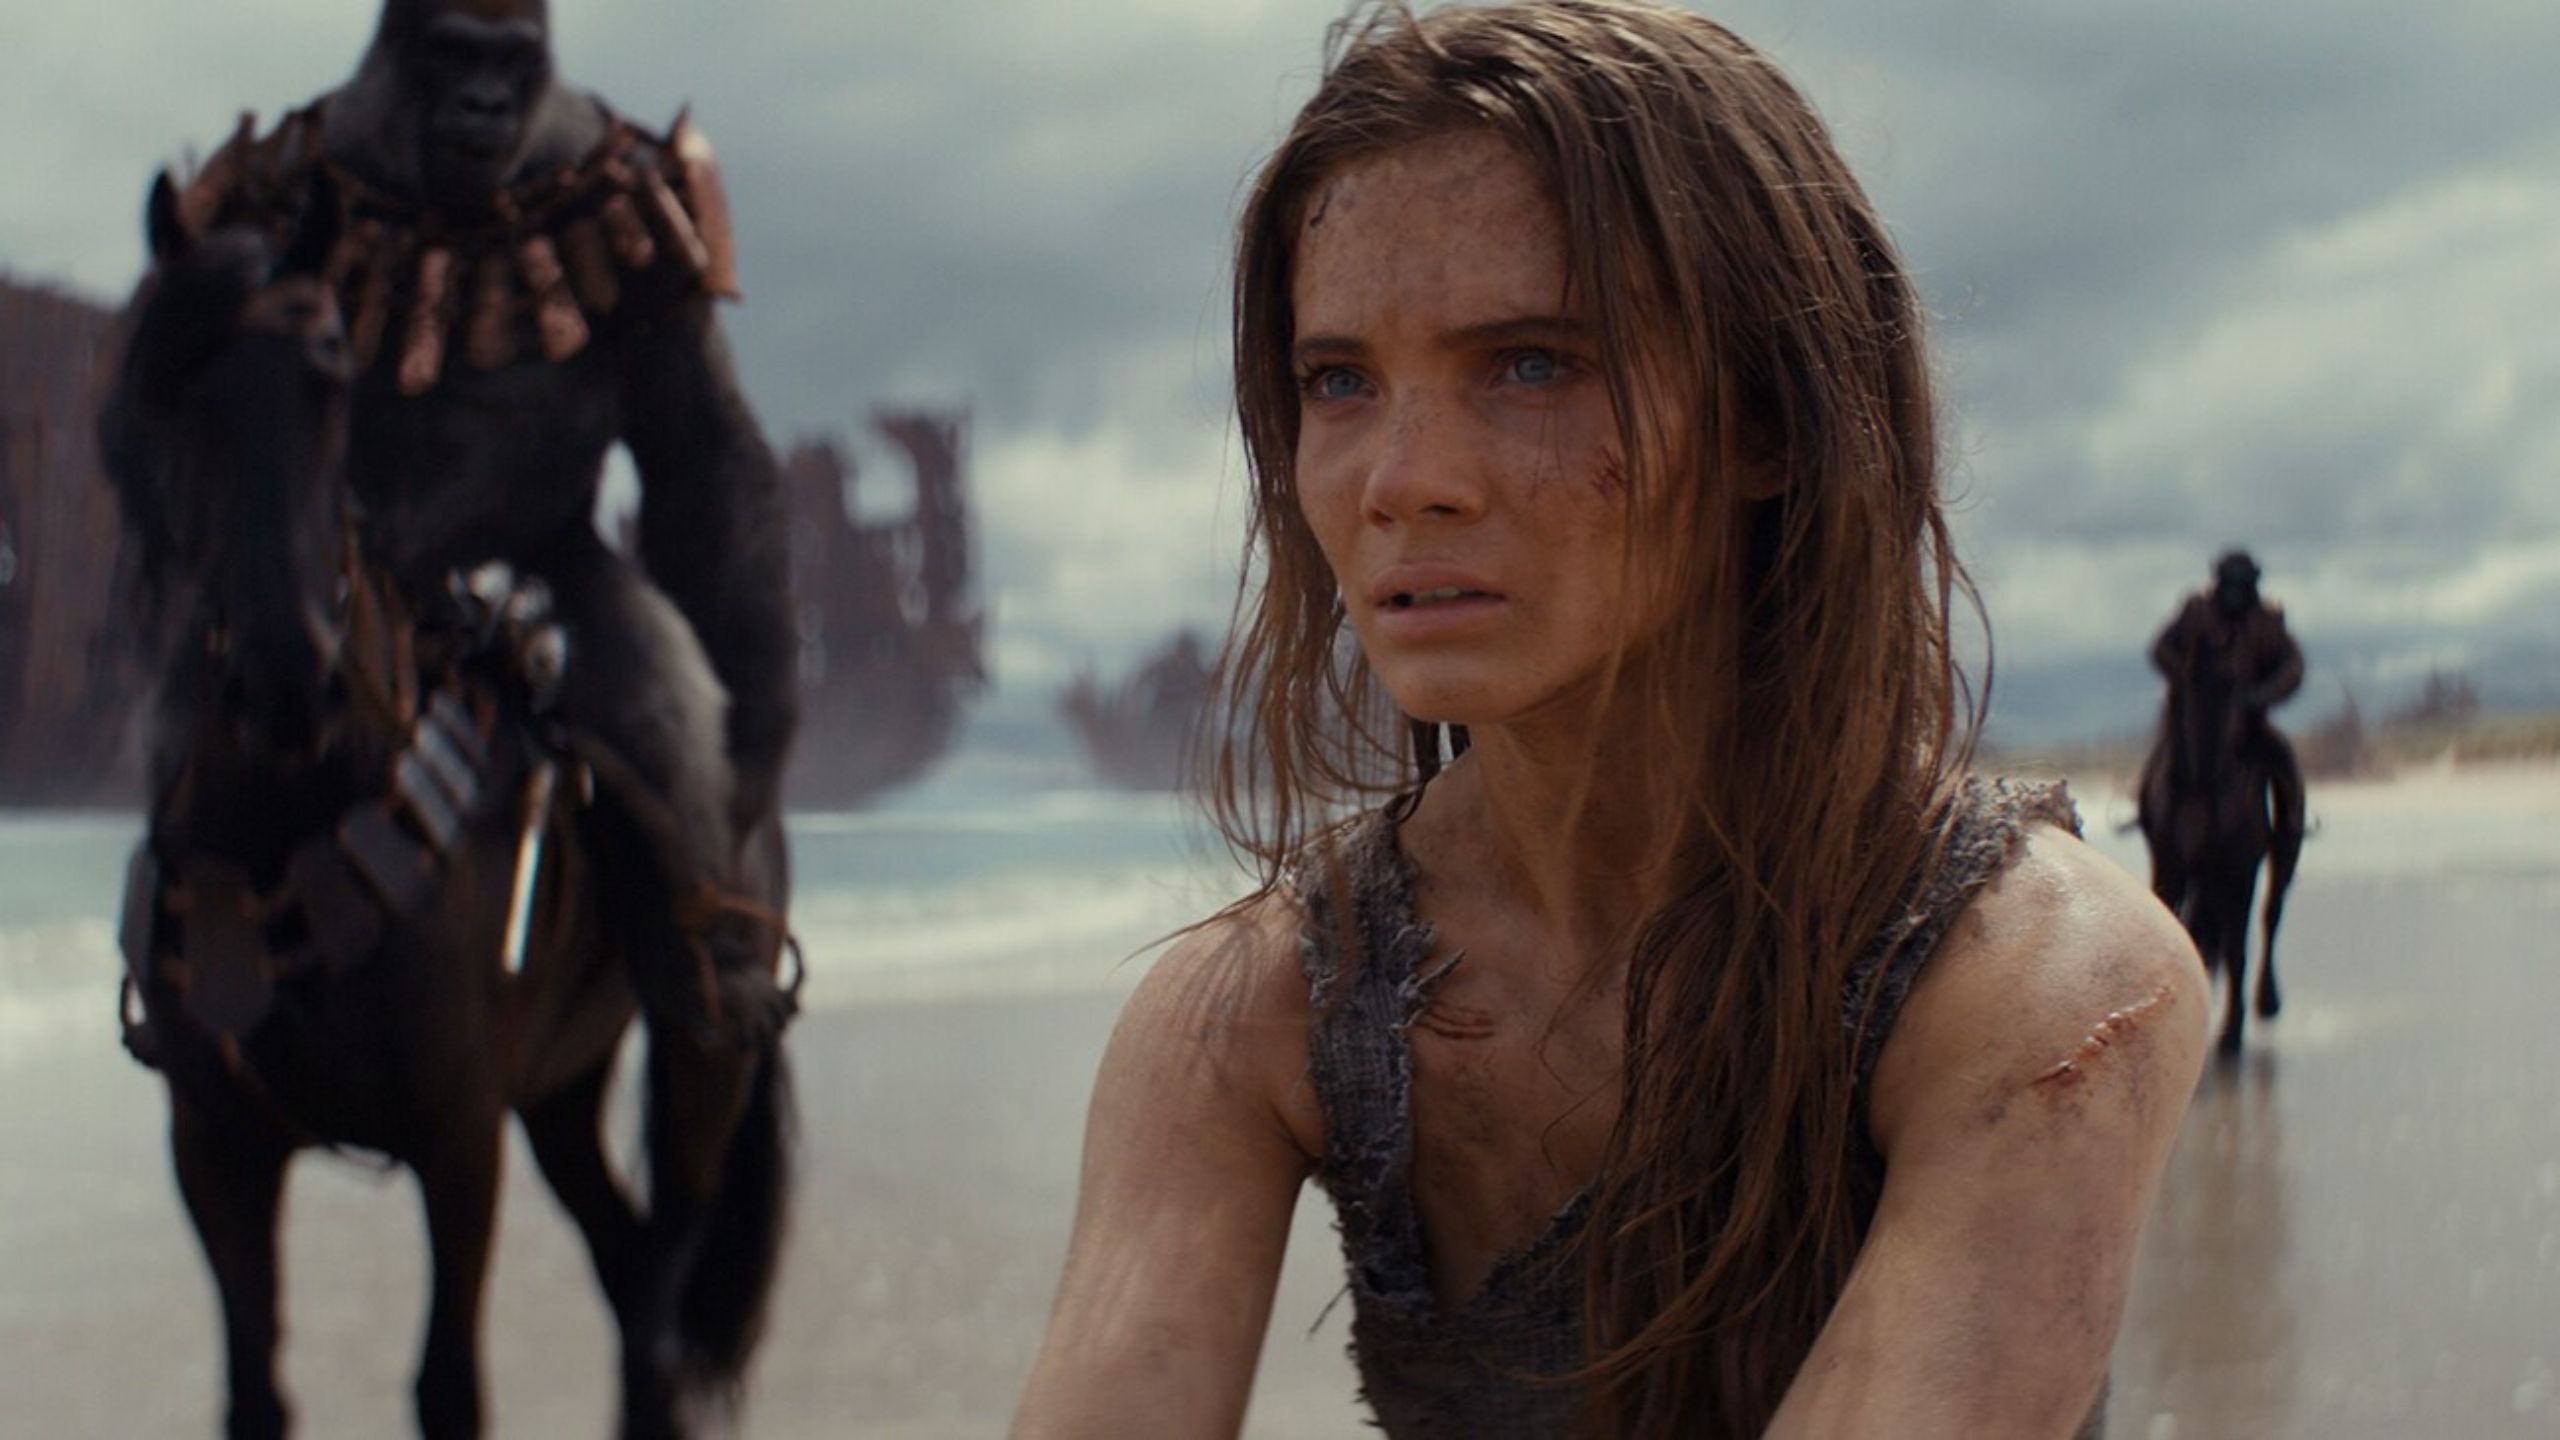 A woman on a beach surrounded by apes on horseback. 